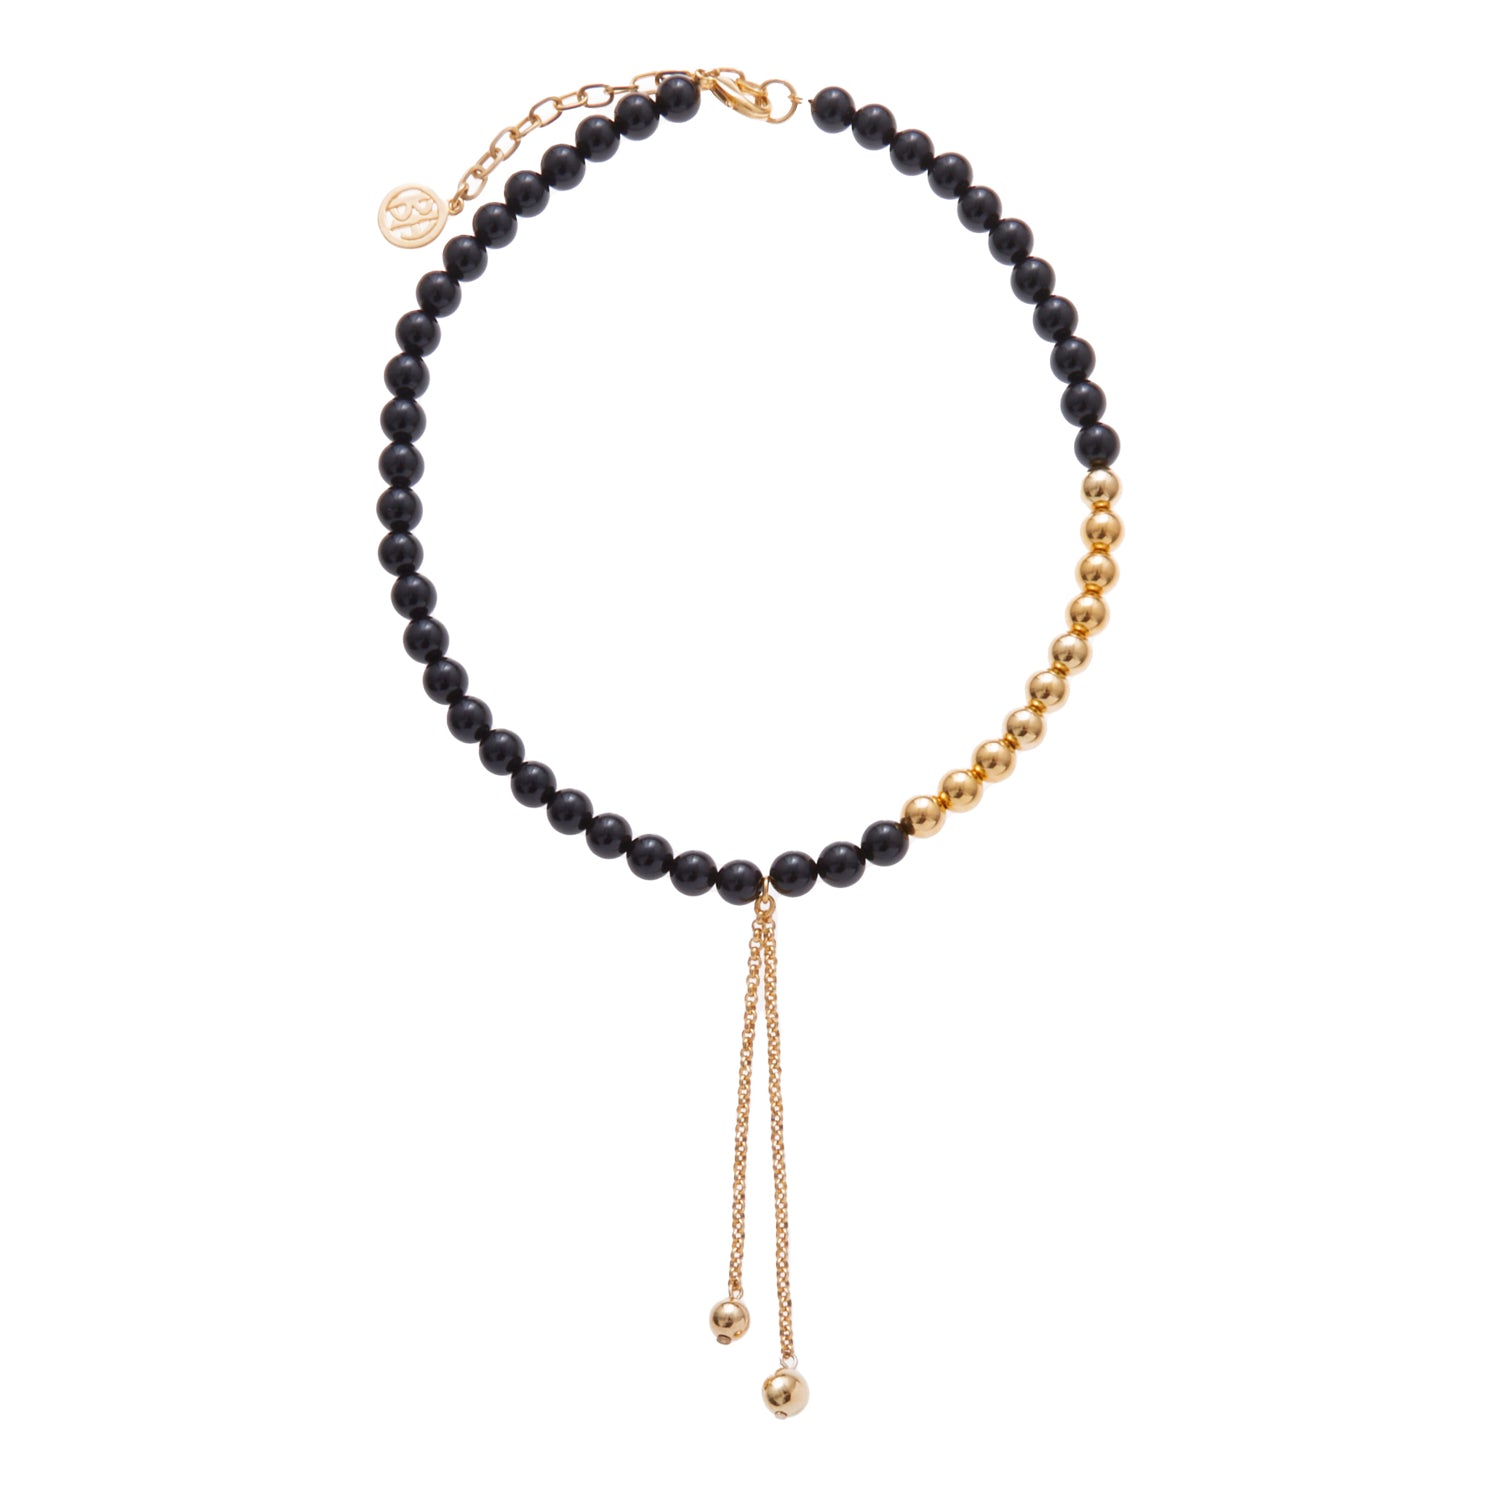 Black and Tan Beaded Gold Necklace